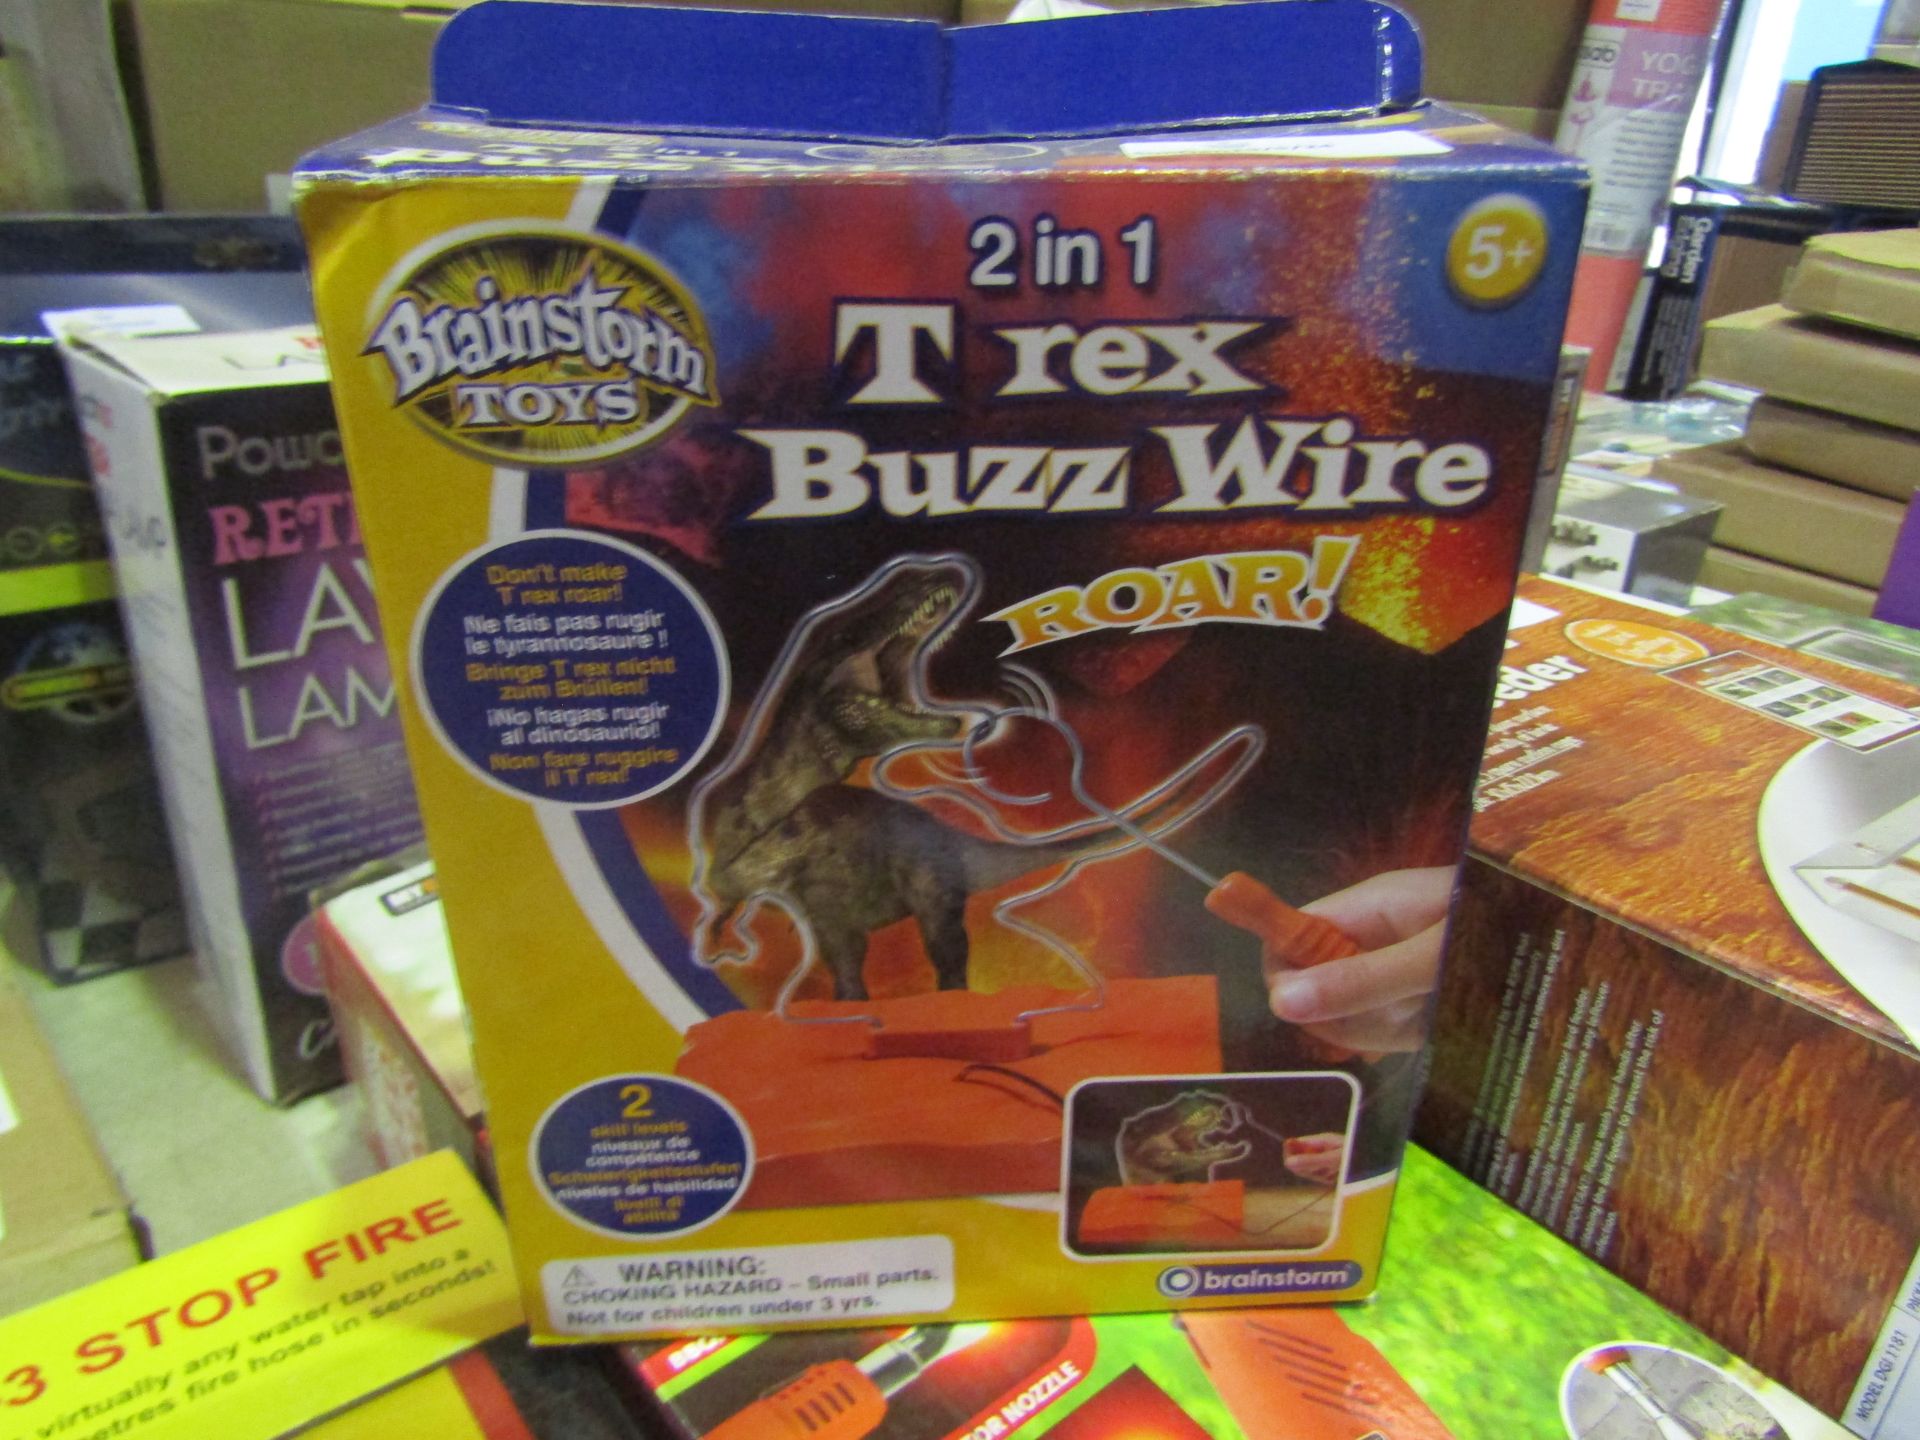 Brainstorm 2in1 T-Rex Buzz Wire - Unchecked & Boxed.